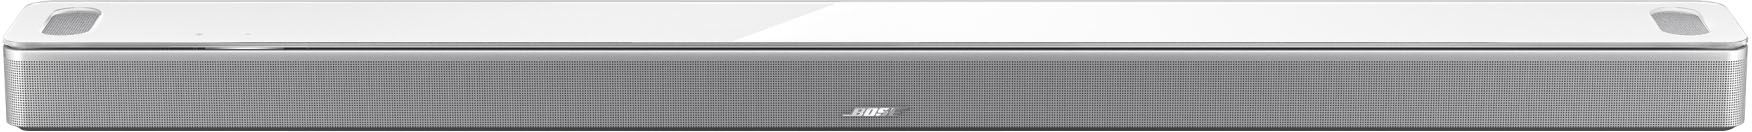 White Soundbar Buy Smart and Voice Atmos Assistant 882963-1200 Arctic Ultra - Dolby with Best Bose